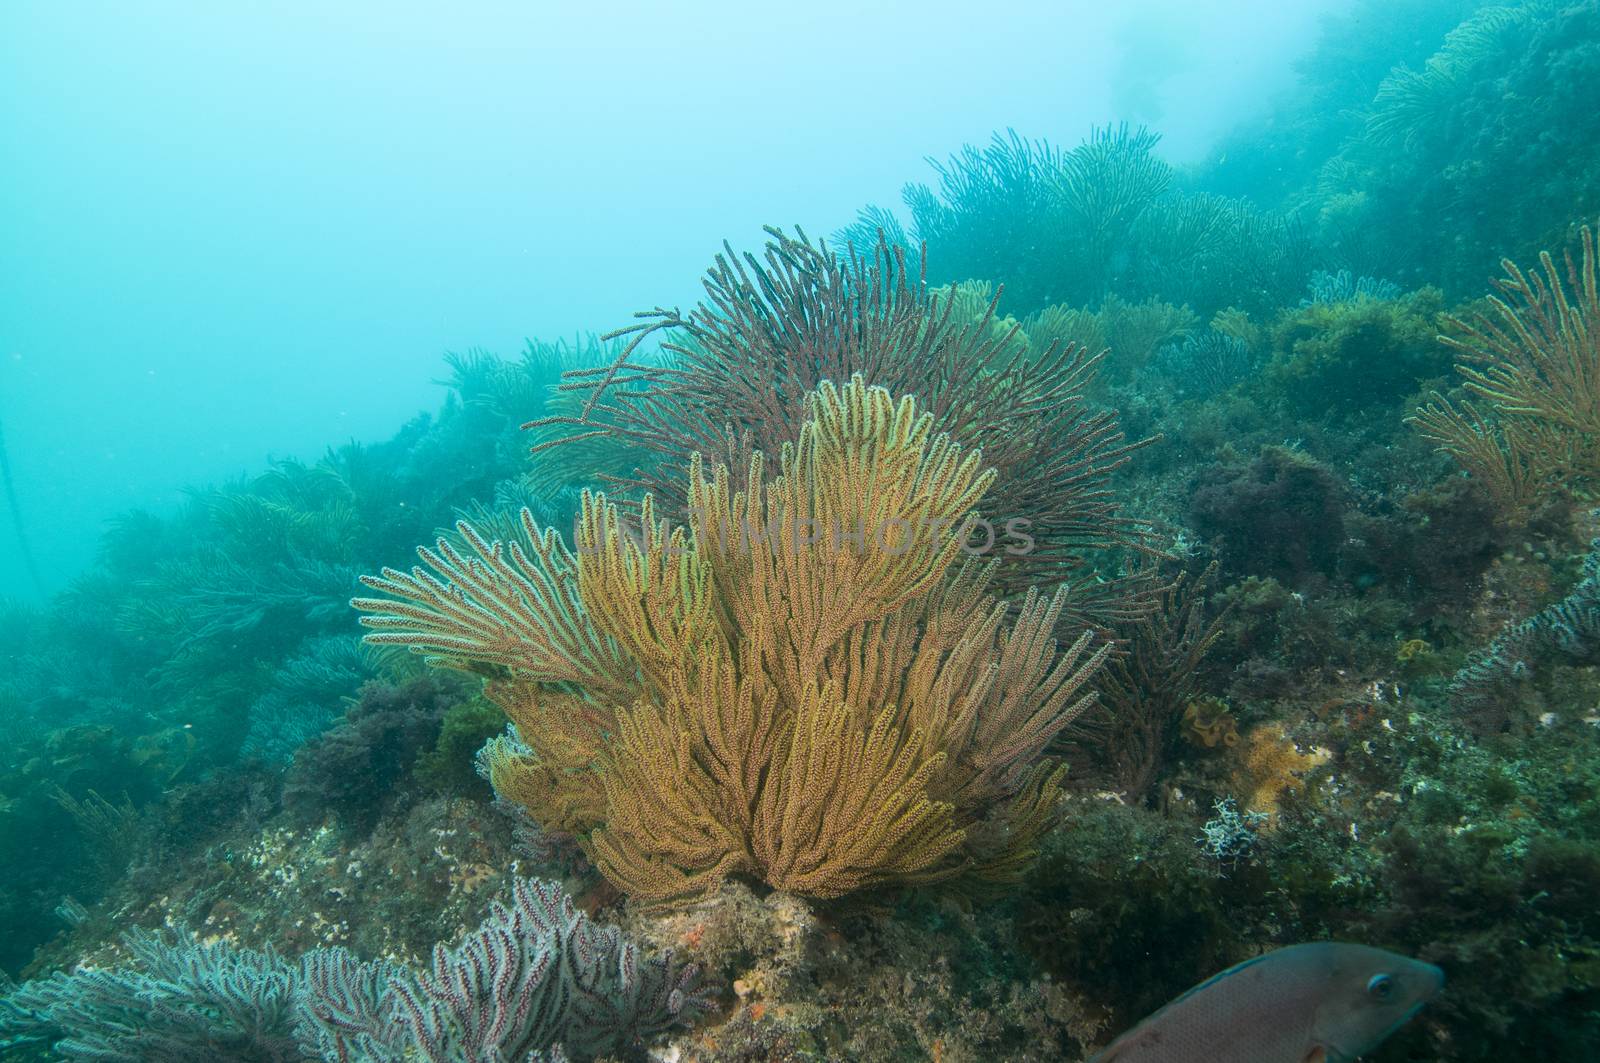 Gorgonian  (also called sea whip or sea fan) off Catalina island by Njean